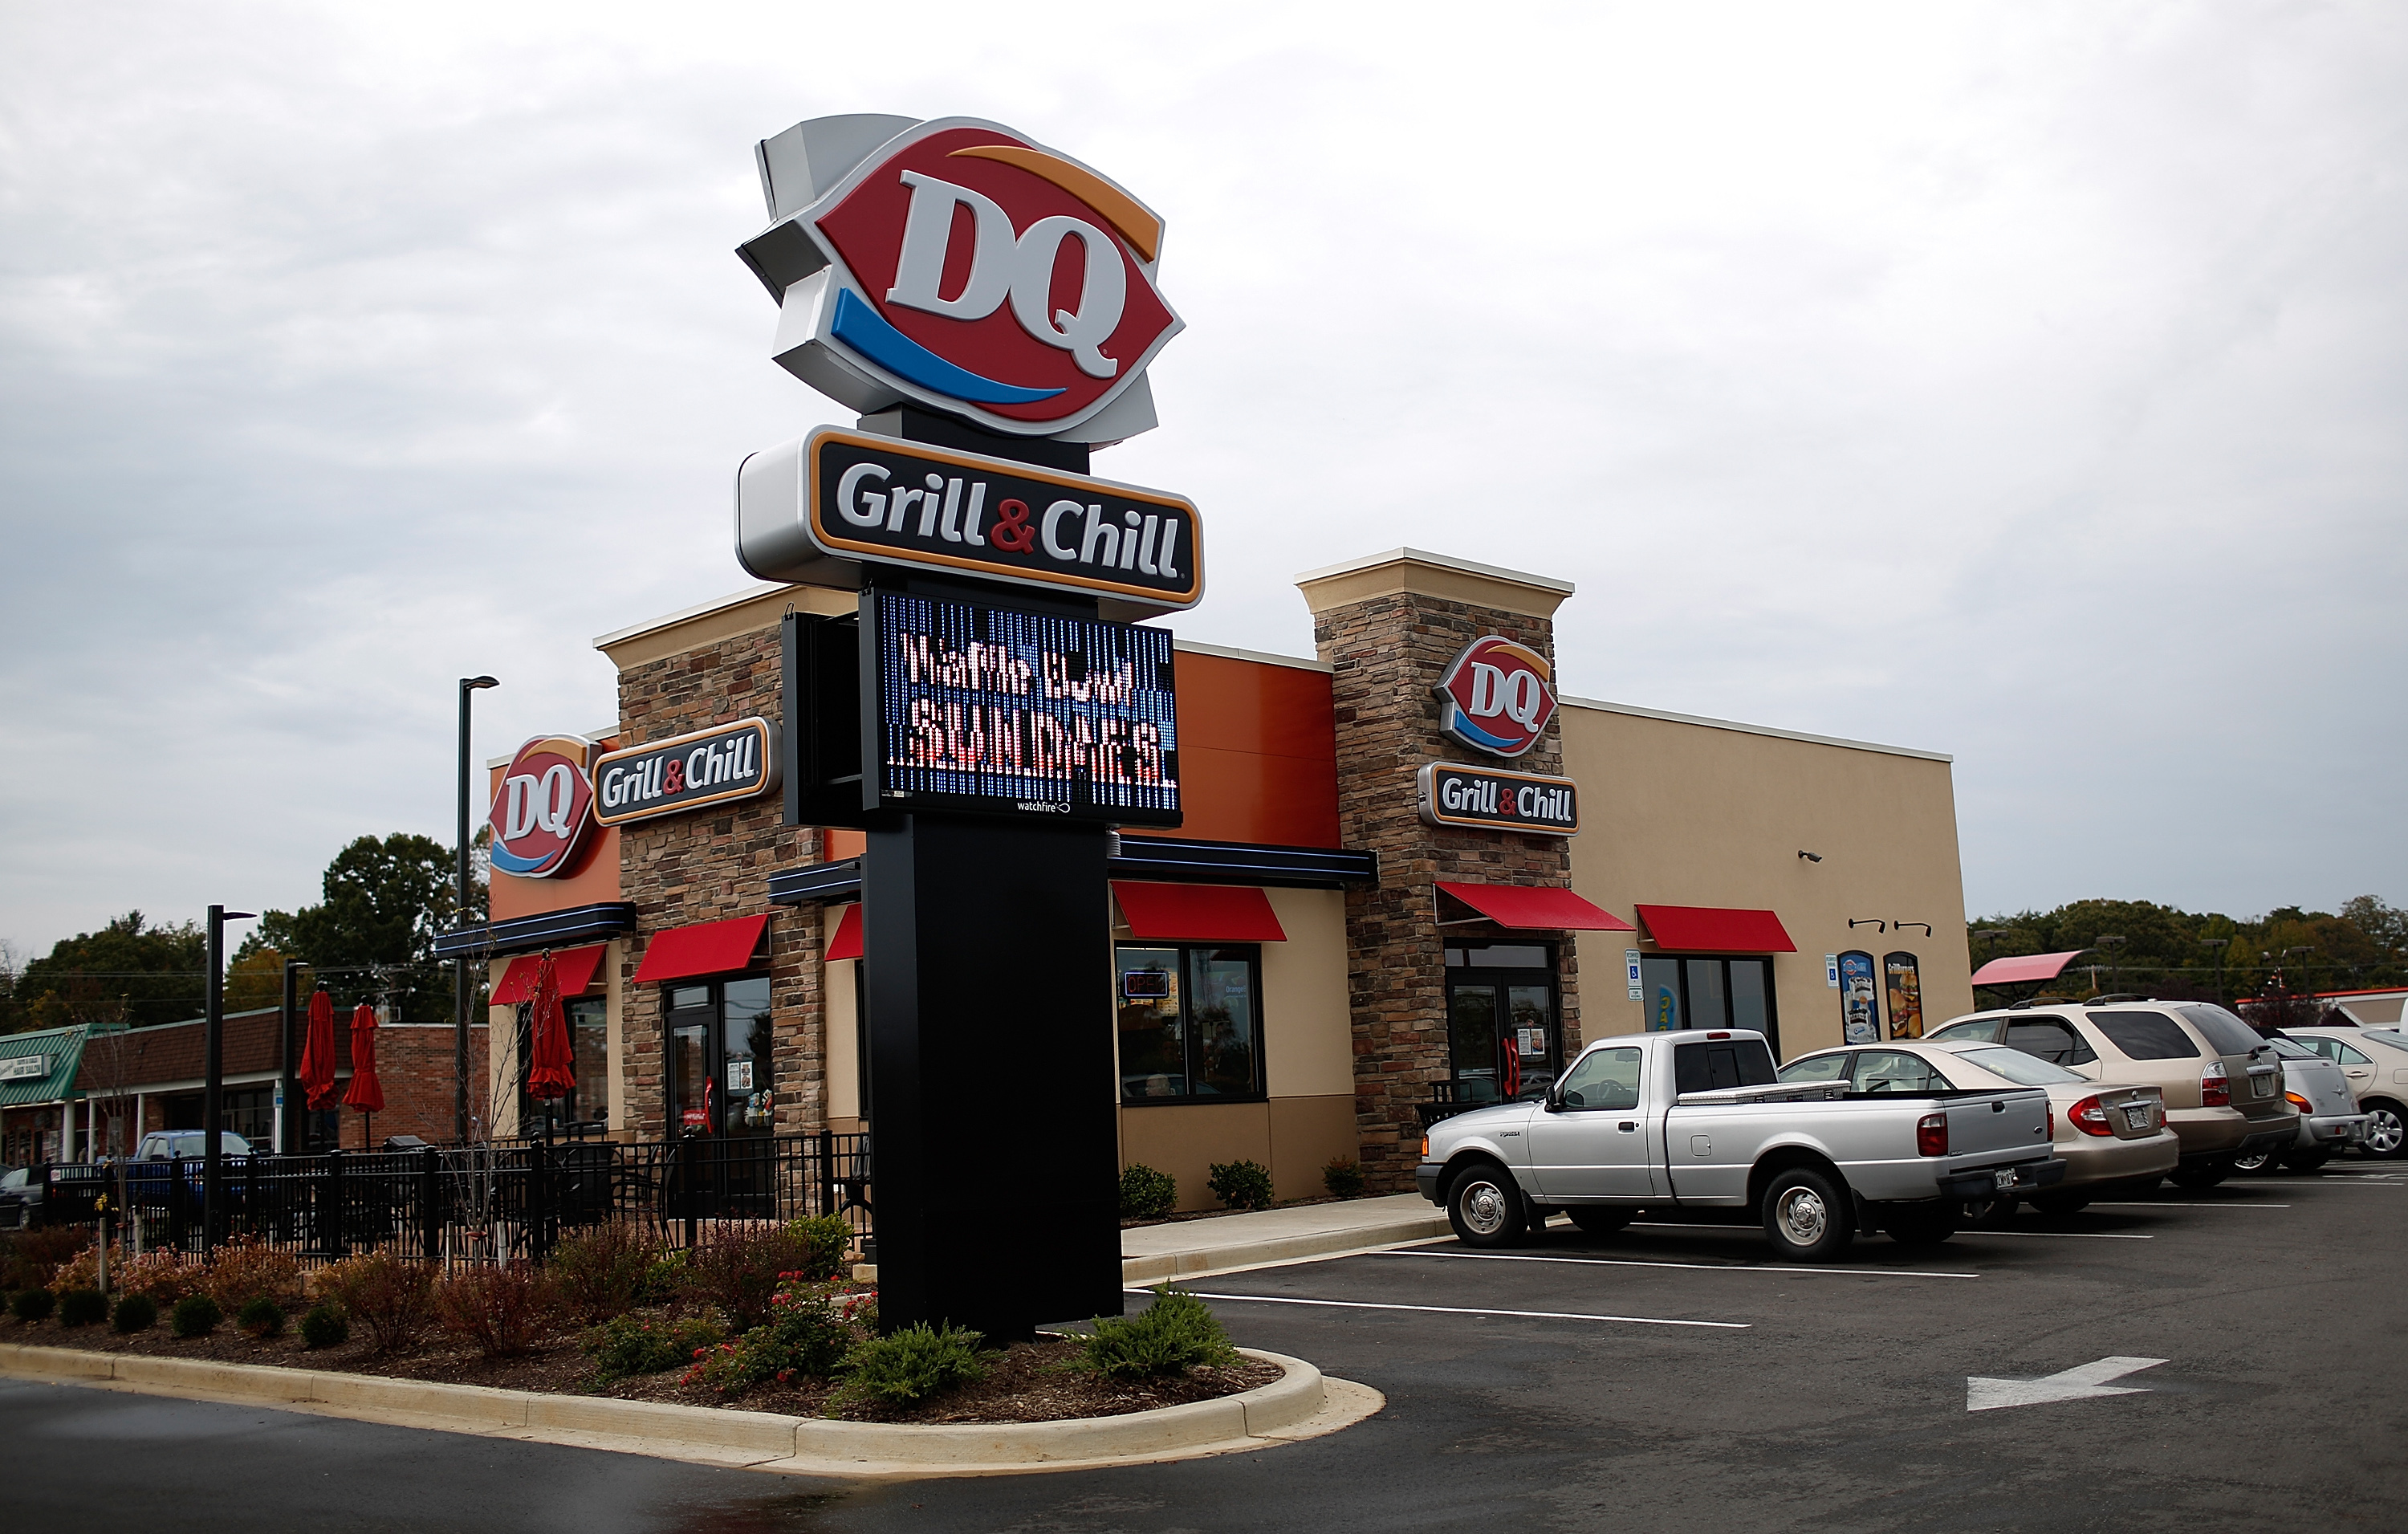 Get a free cone at Dairy Queen